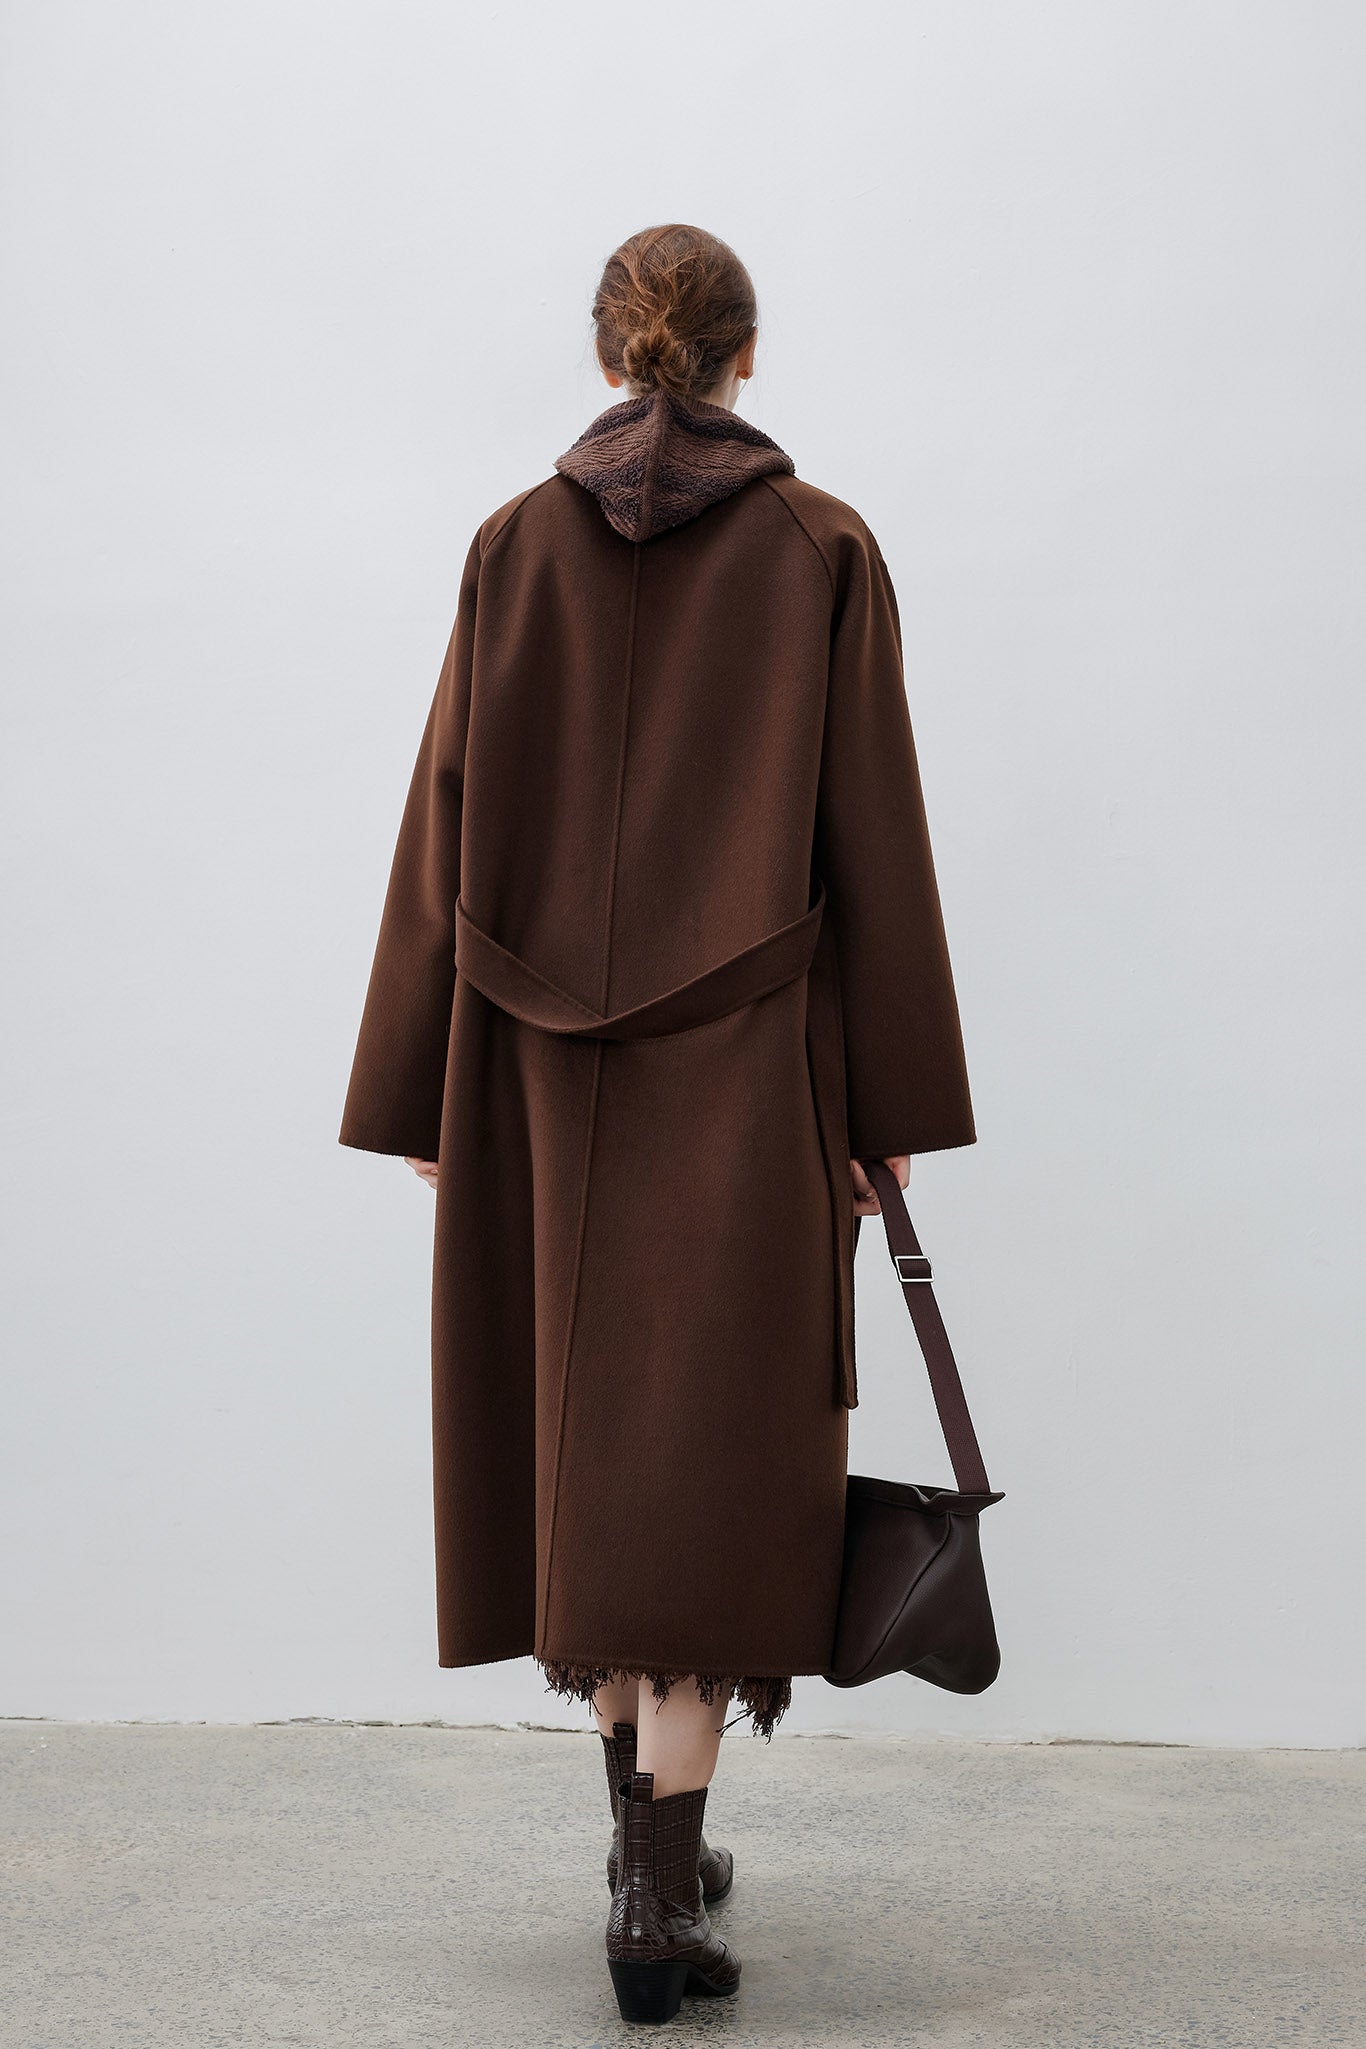 [tageechita] Compressed wool stand collar long coat